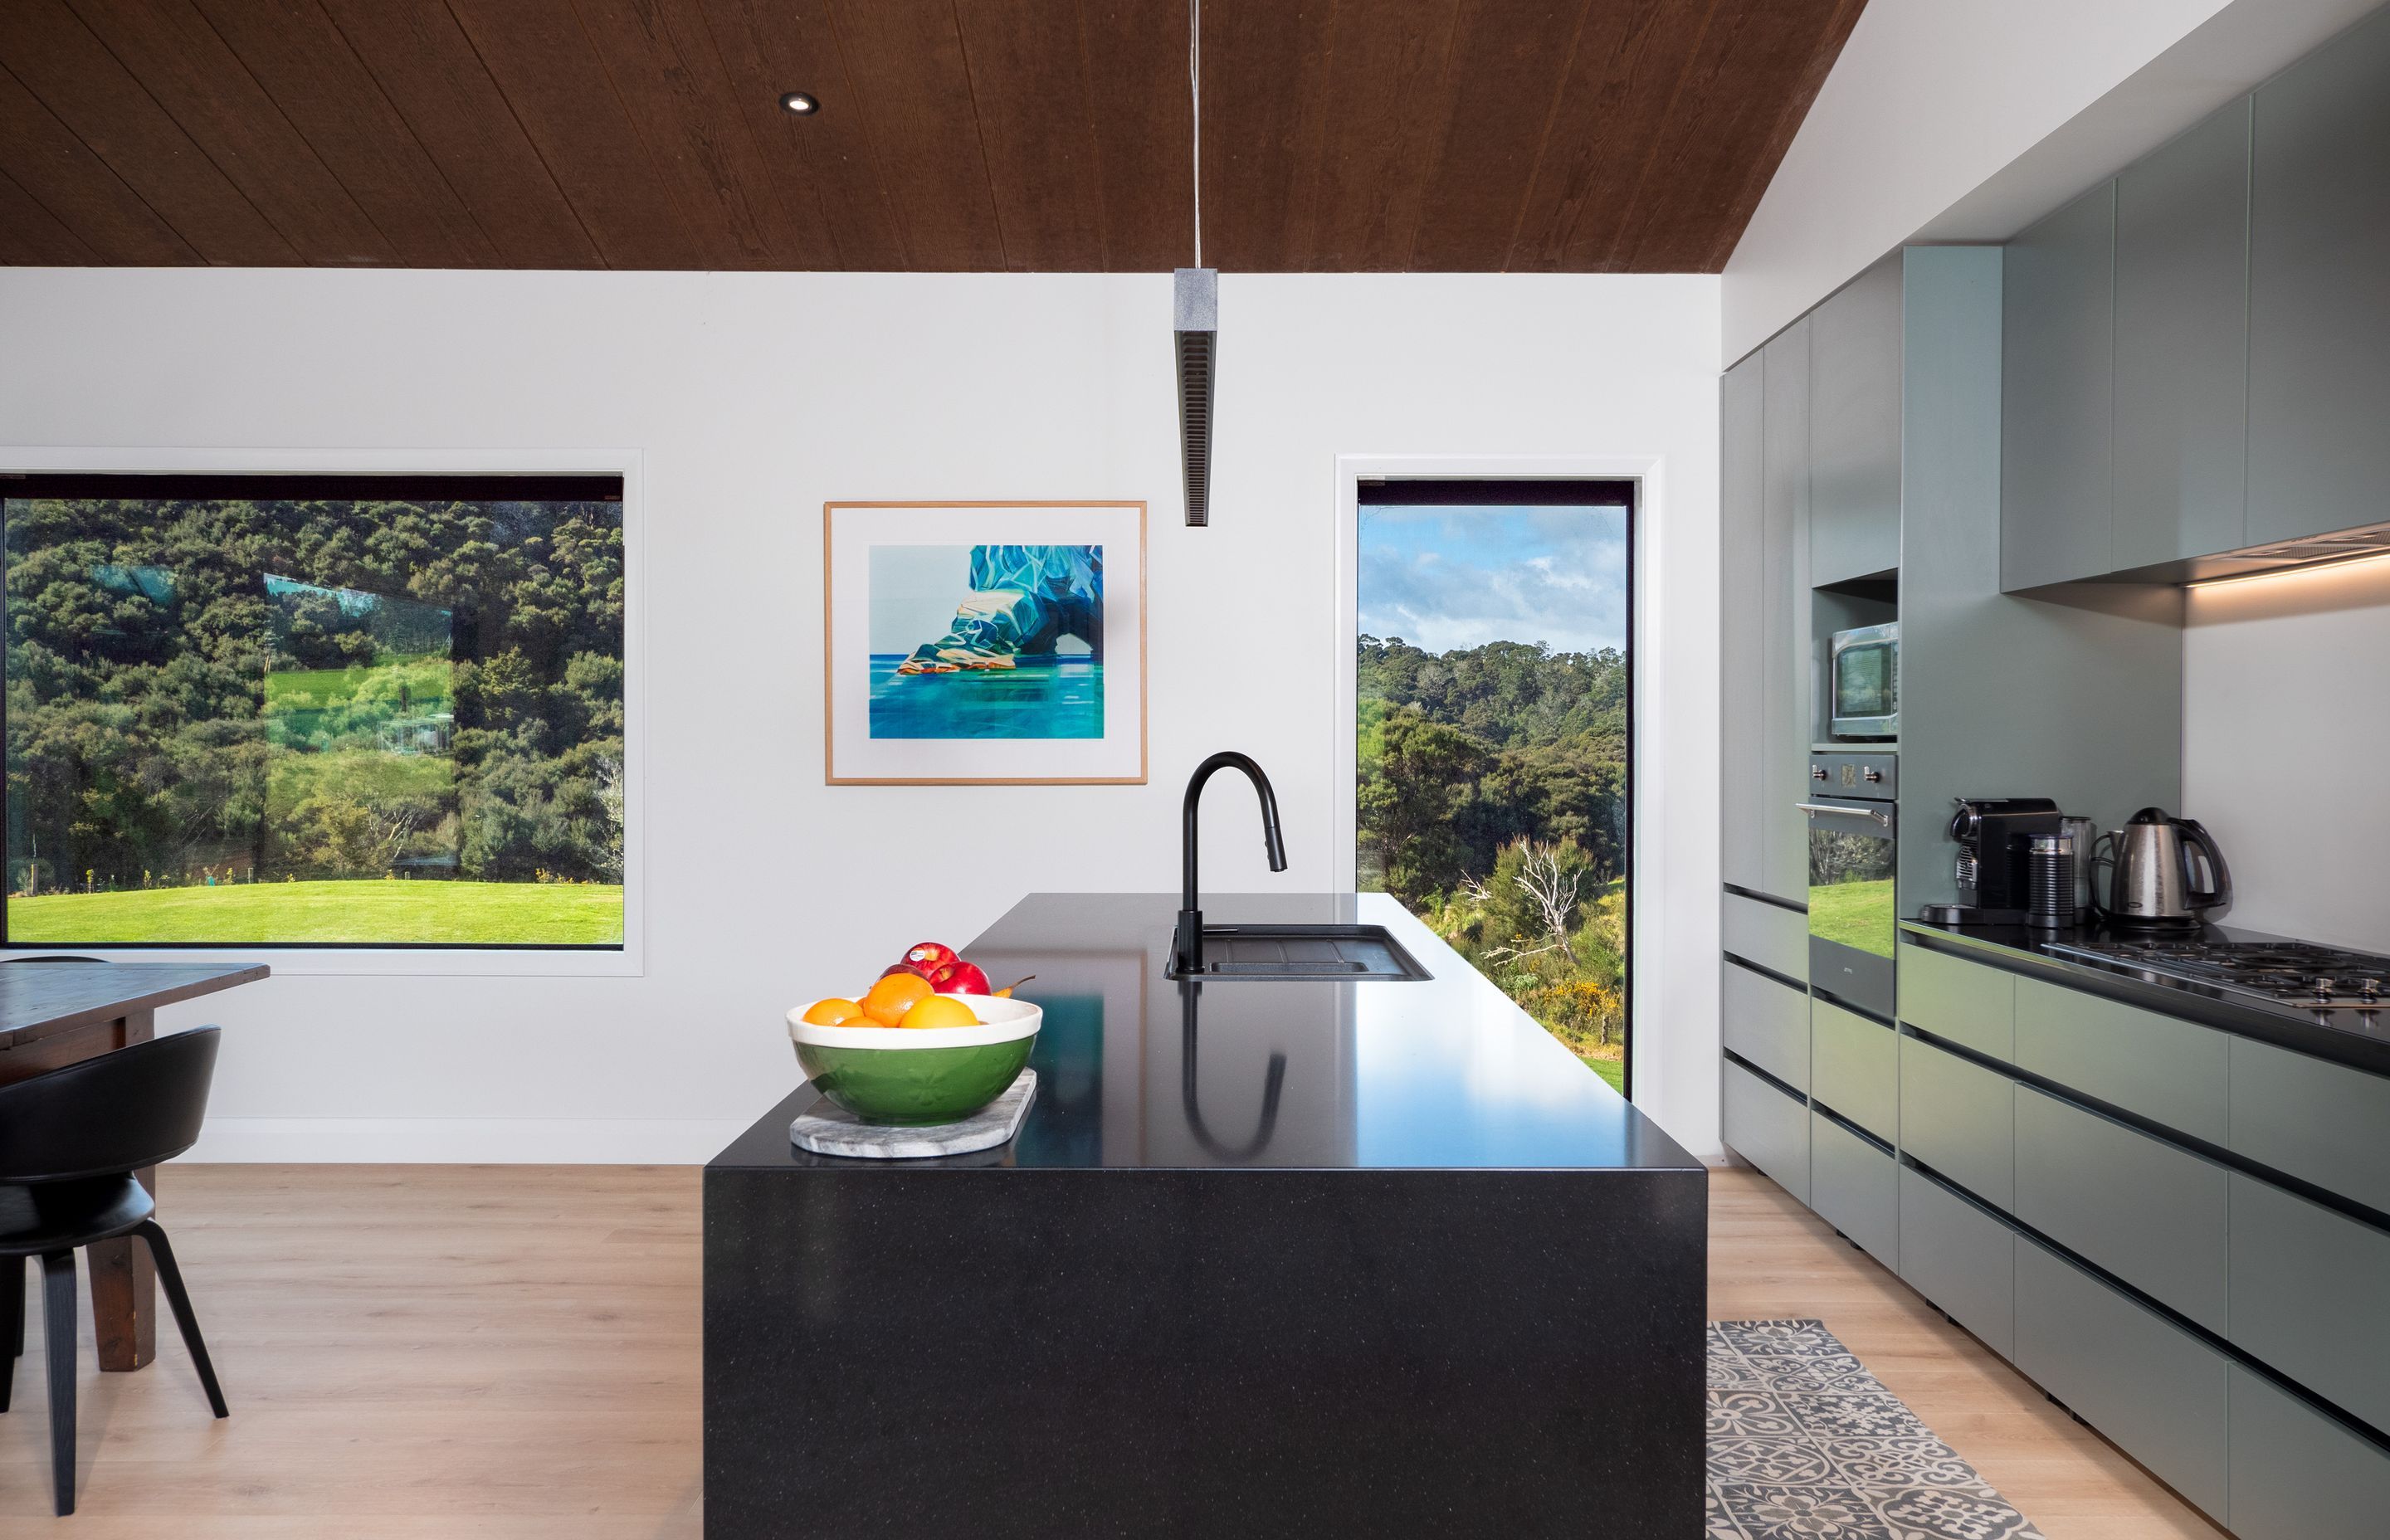 Whitney and Corey recently visited the finished home and the clients, who are very happy with the end result. Geary Group's first concept design, a home in Kerikeri, has just been completed. Photo credit: Ash Boyd.